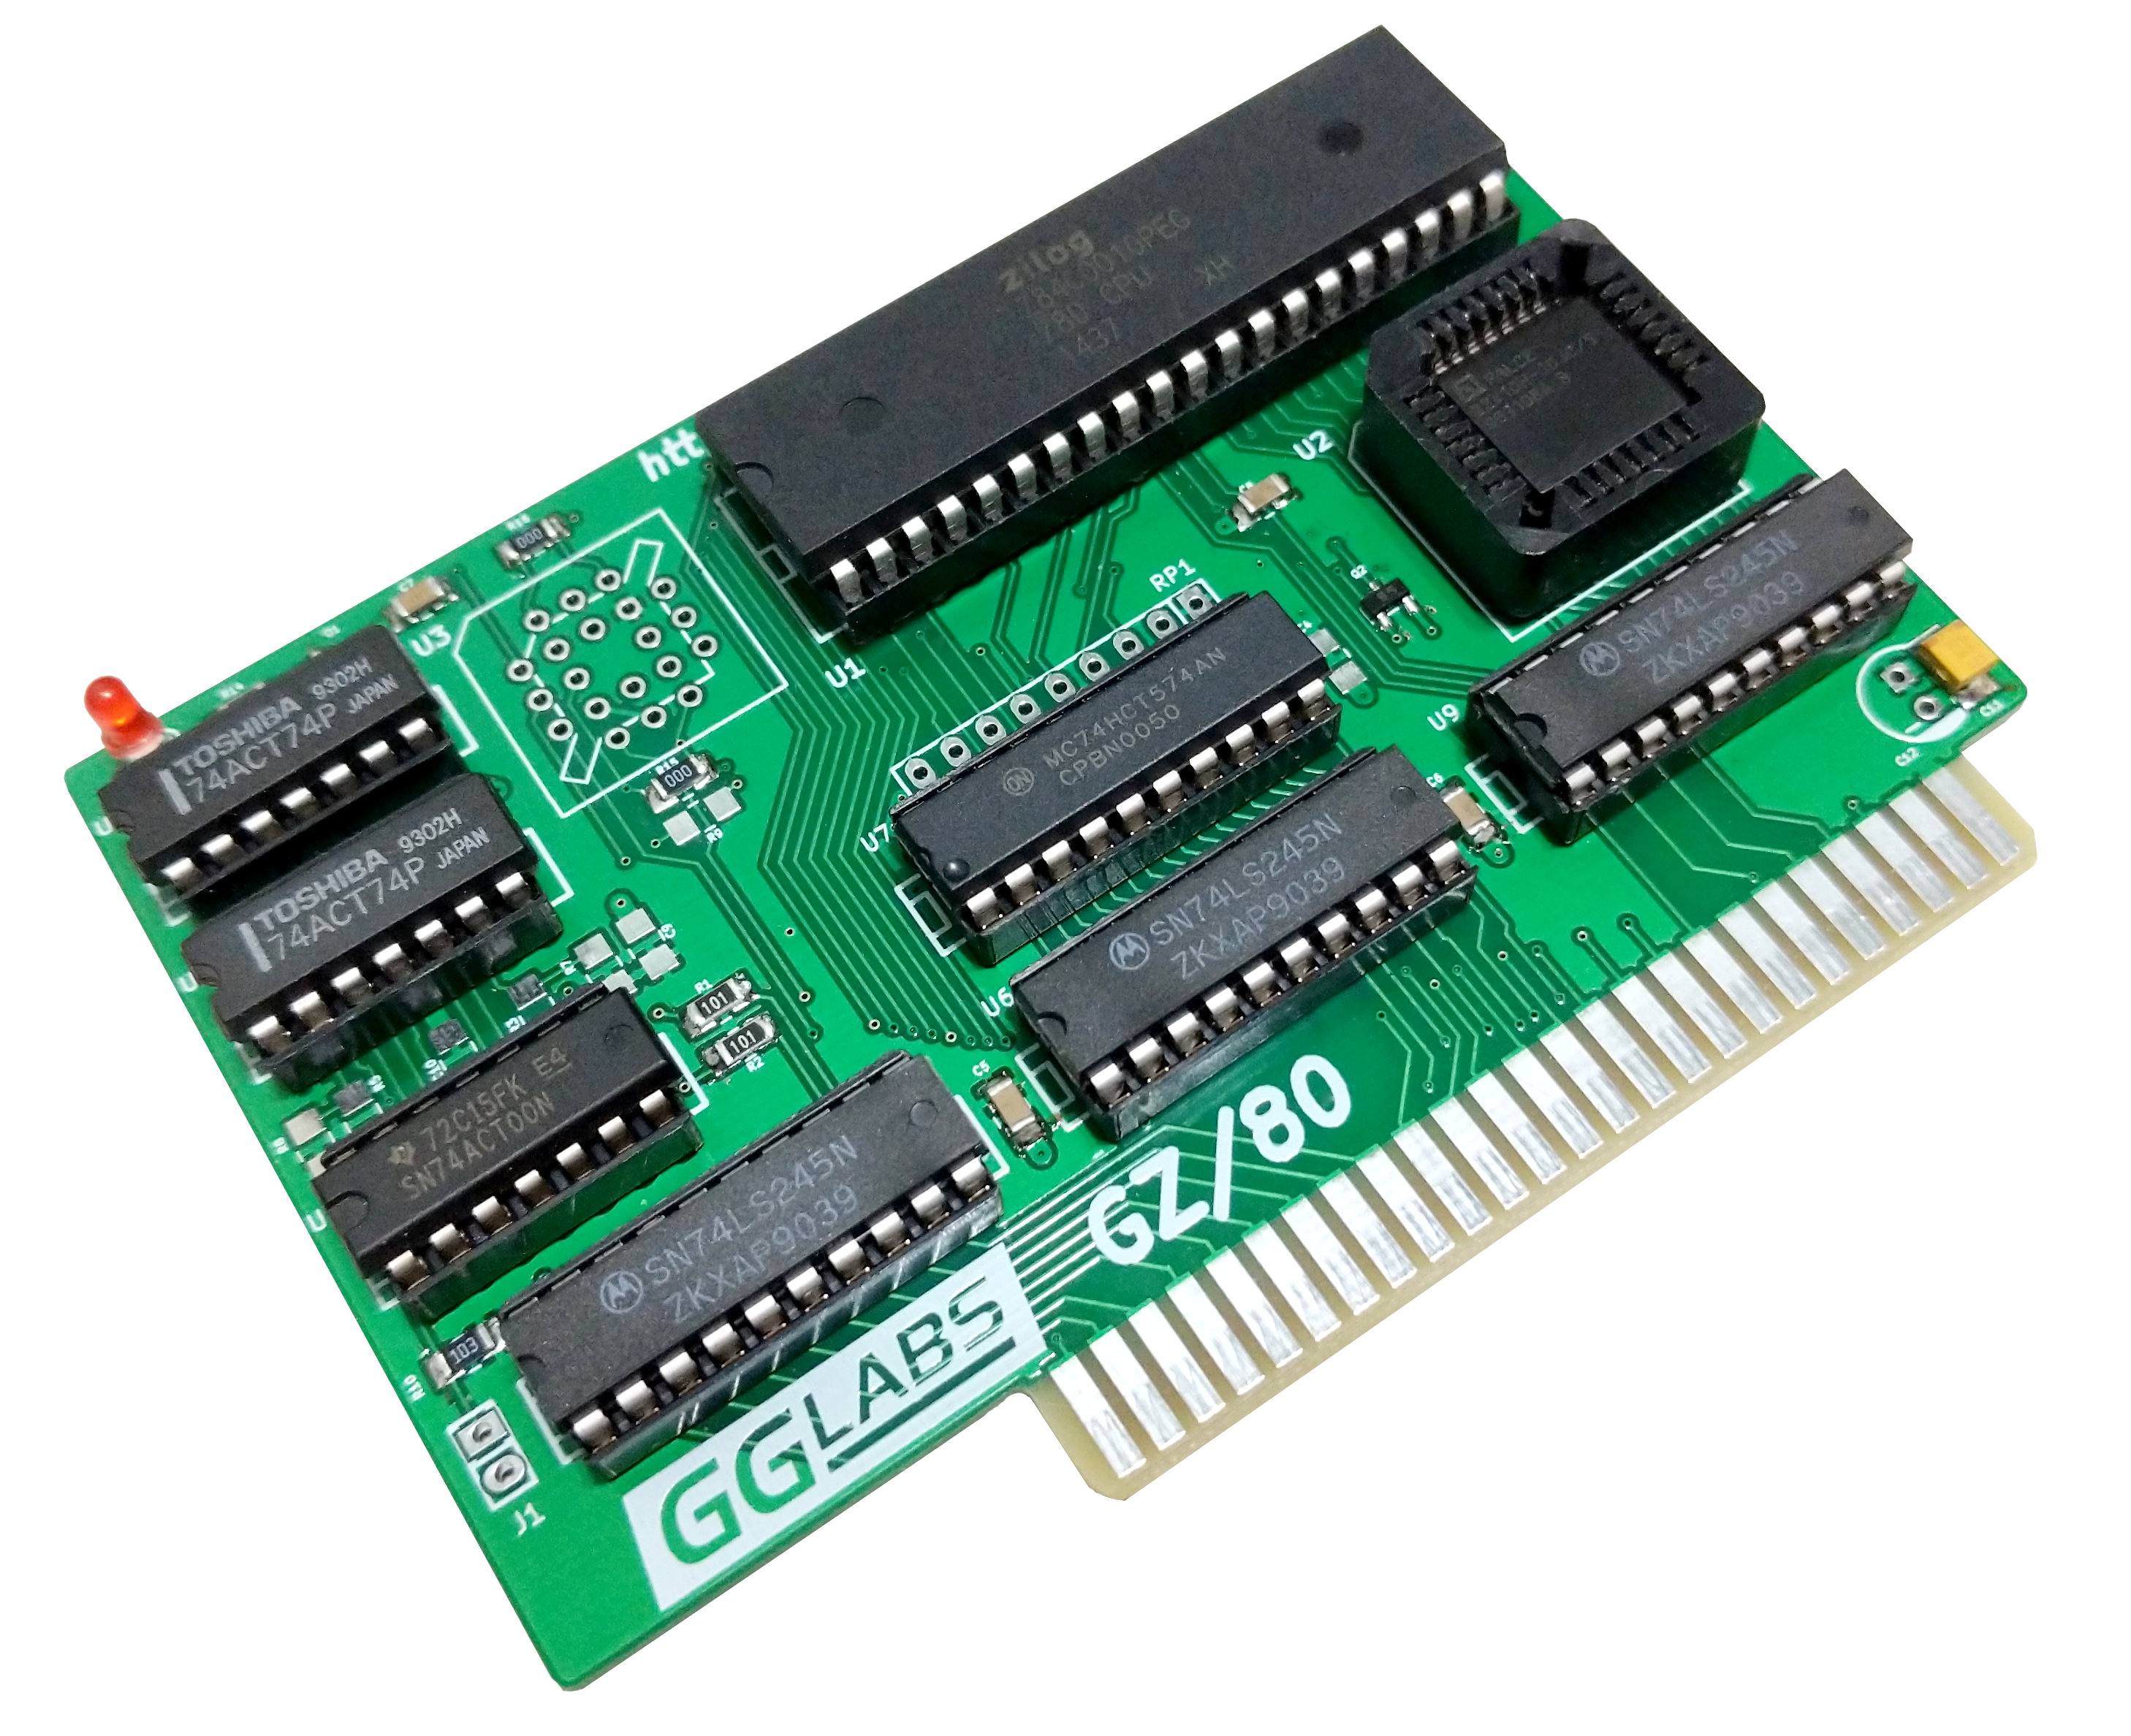 Softcard compatible Zilog Z80 GGLABS GZ/80 Apple II/IIgs Turbo 7MHz CP/M Card 